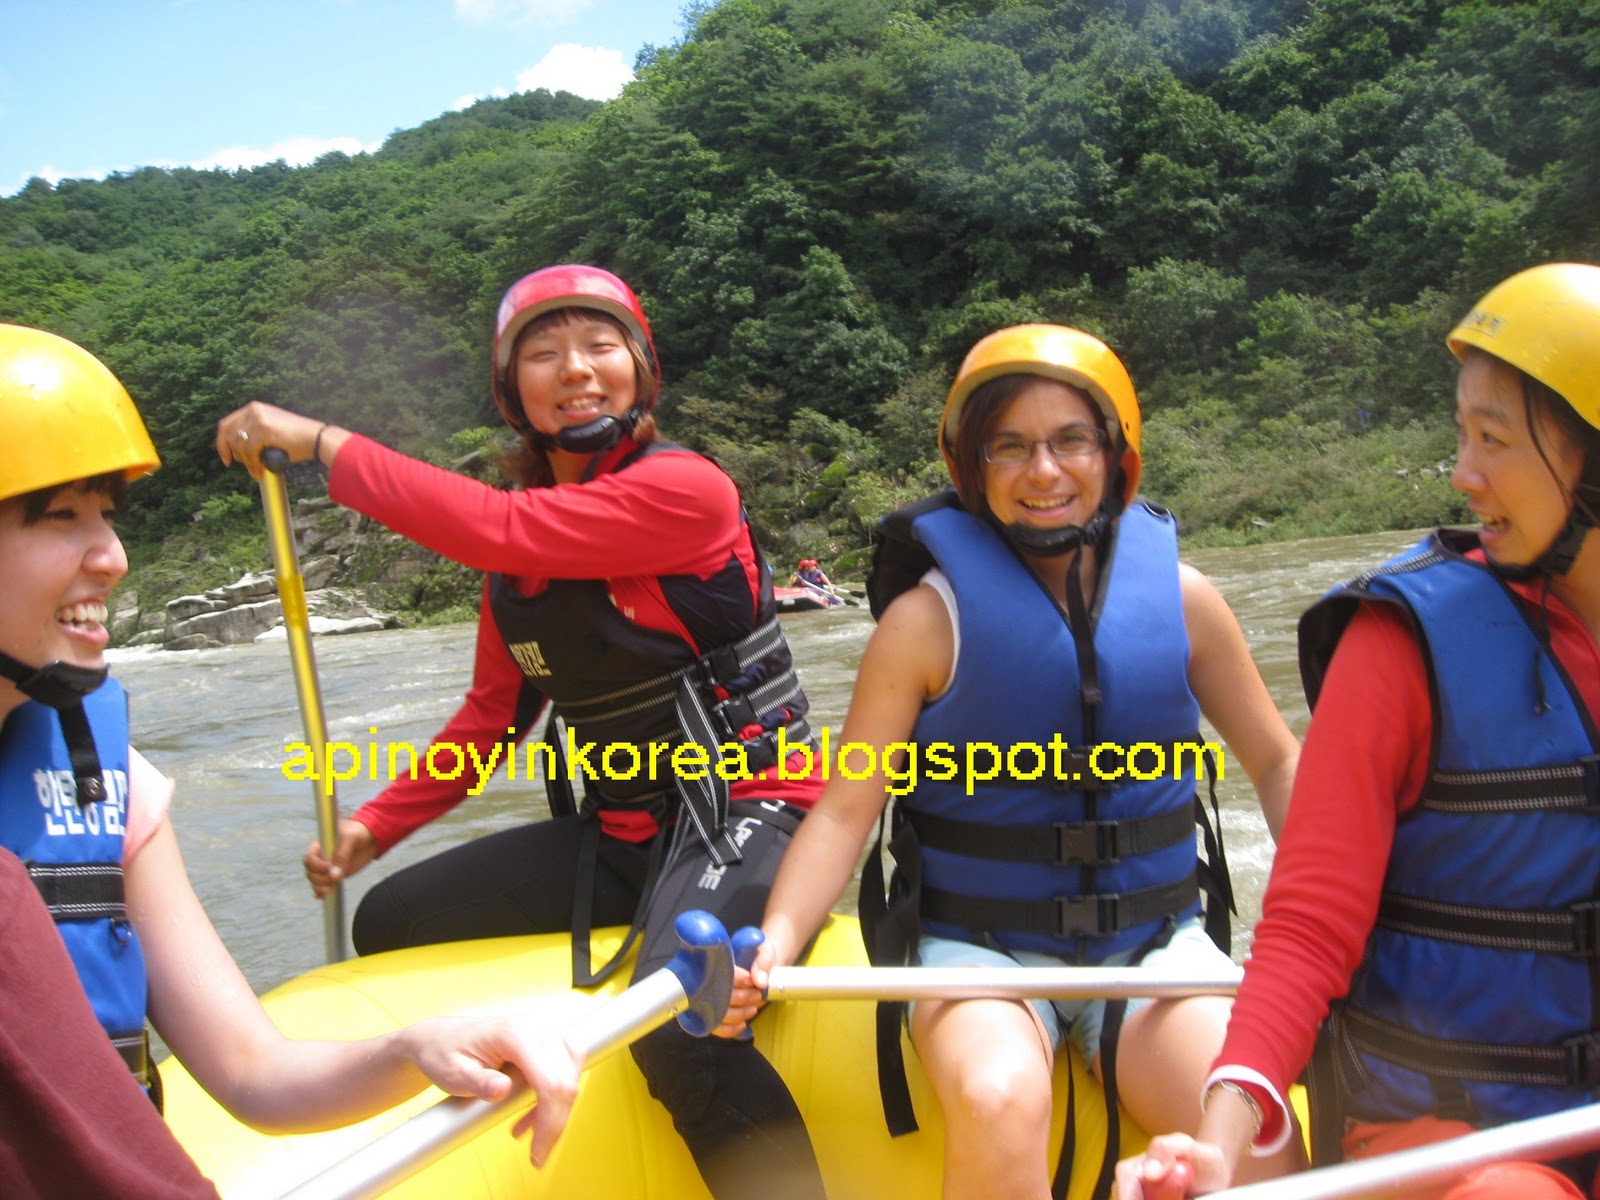 A Pinoy in Korea: Rafting in the Korean Summer!